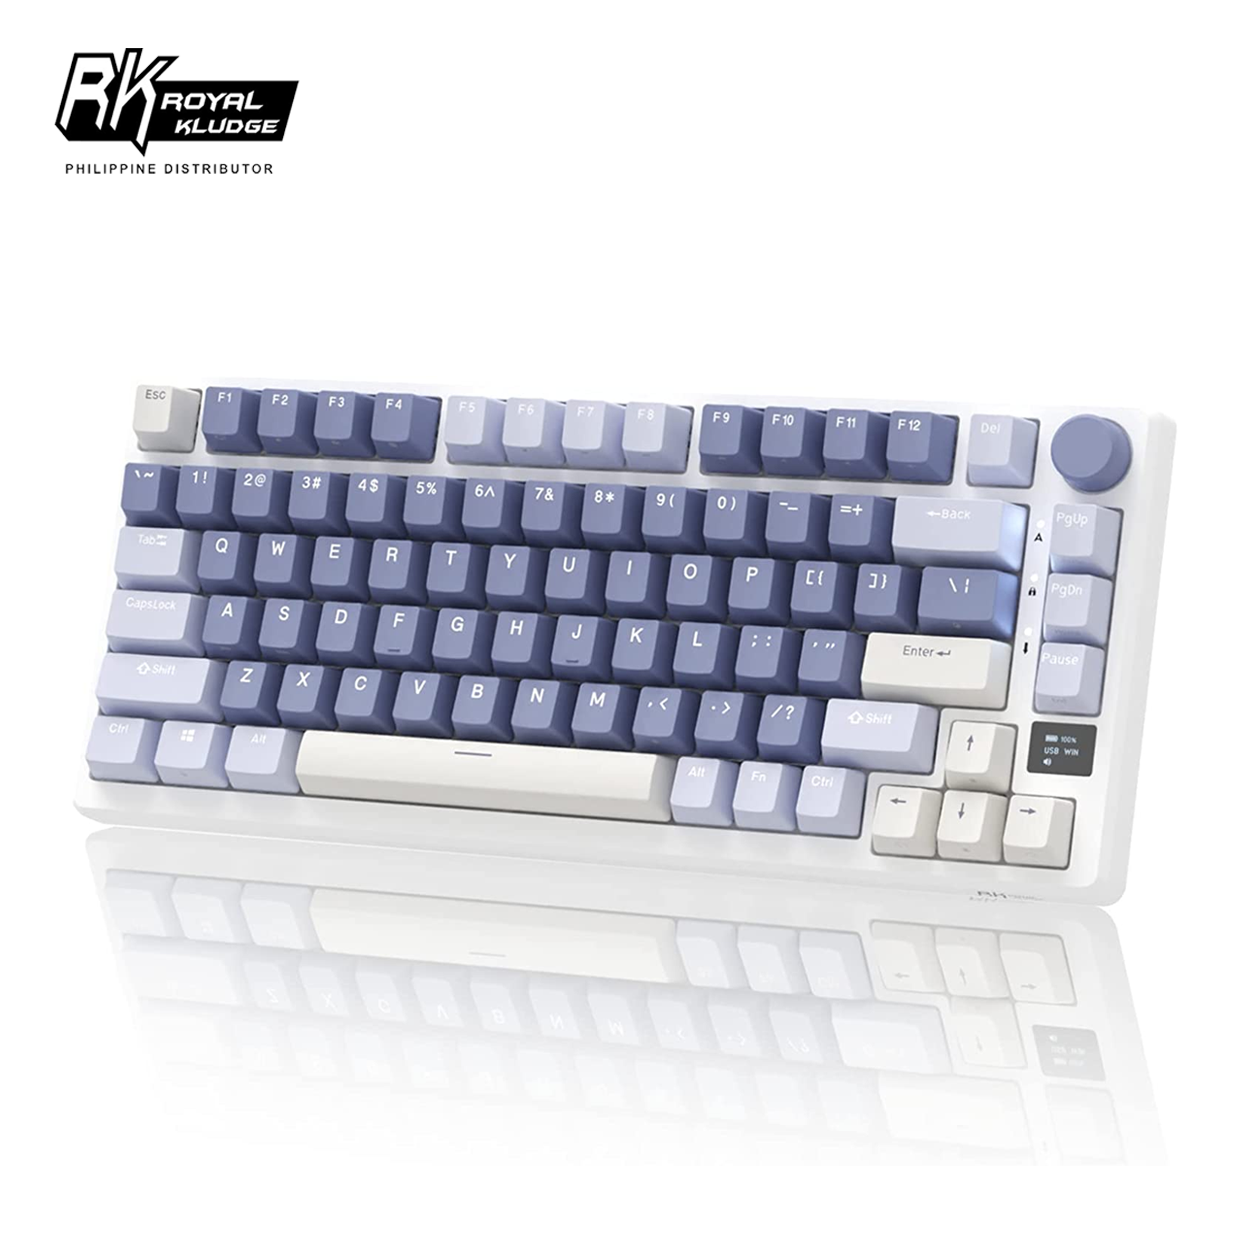 EXCLUSIVE Royal Kludge RKM75 75% RGB with OLED Smart Display & Knob Wireless Mechanical Gaming Keyboard